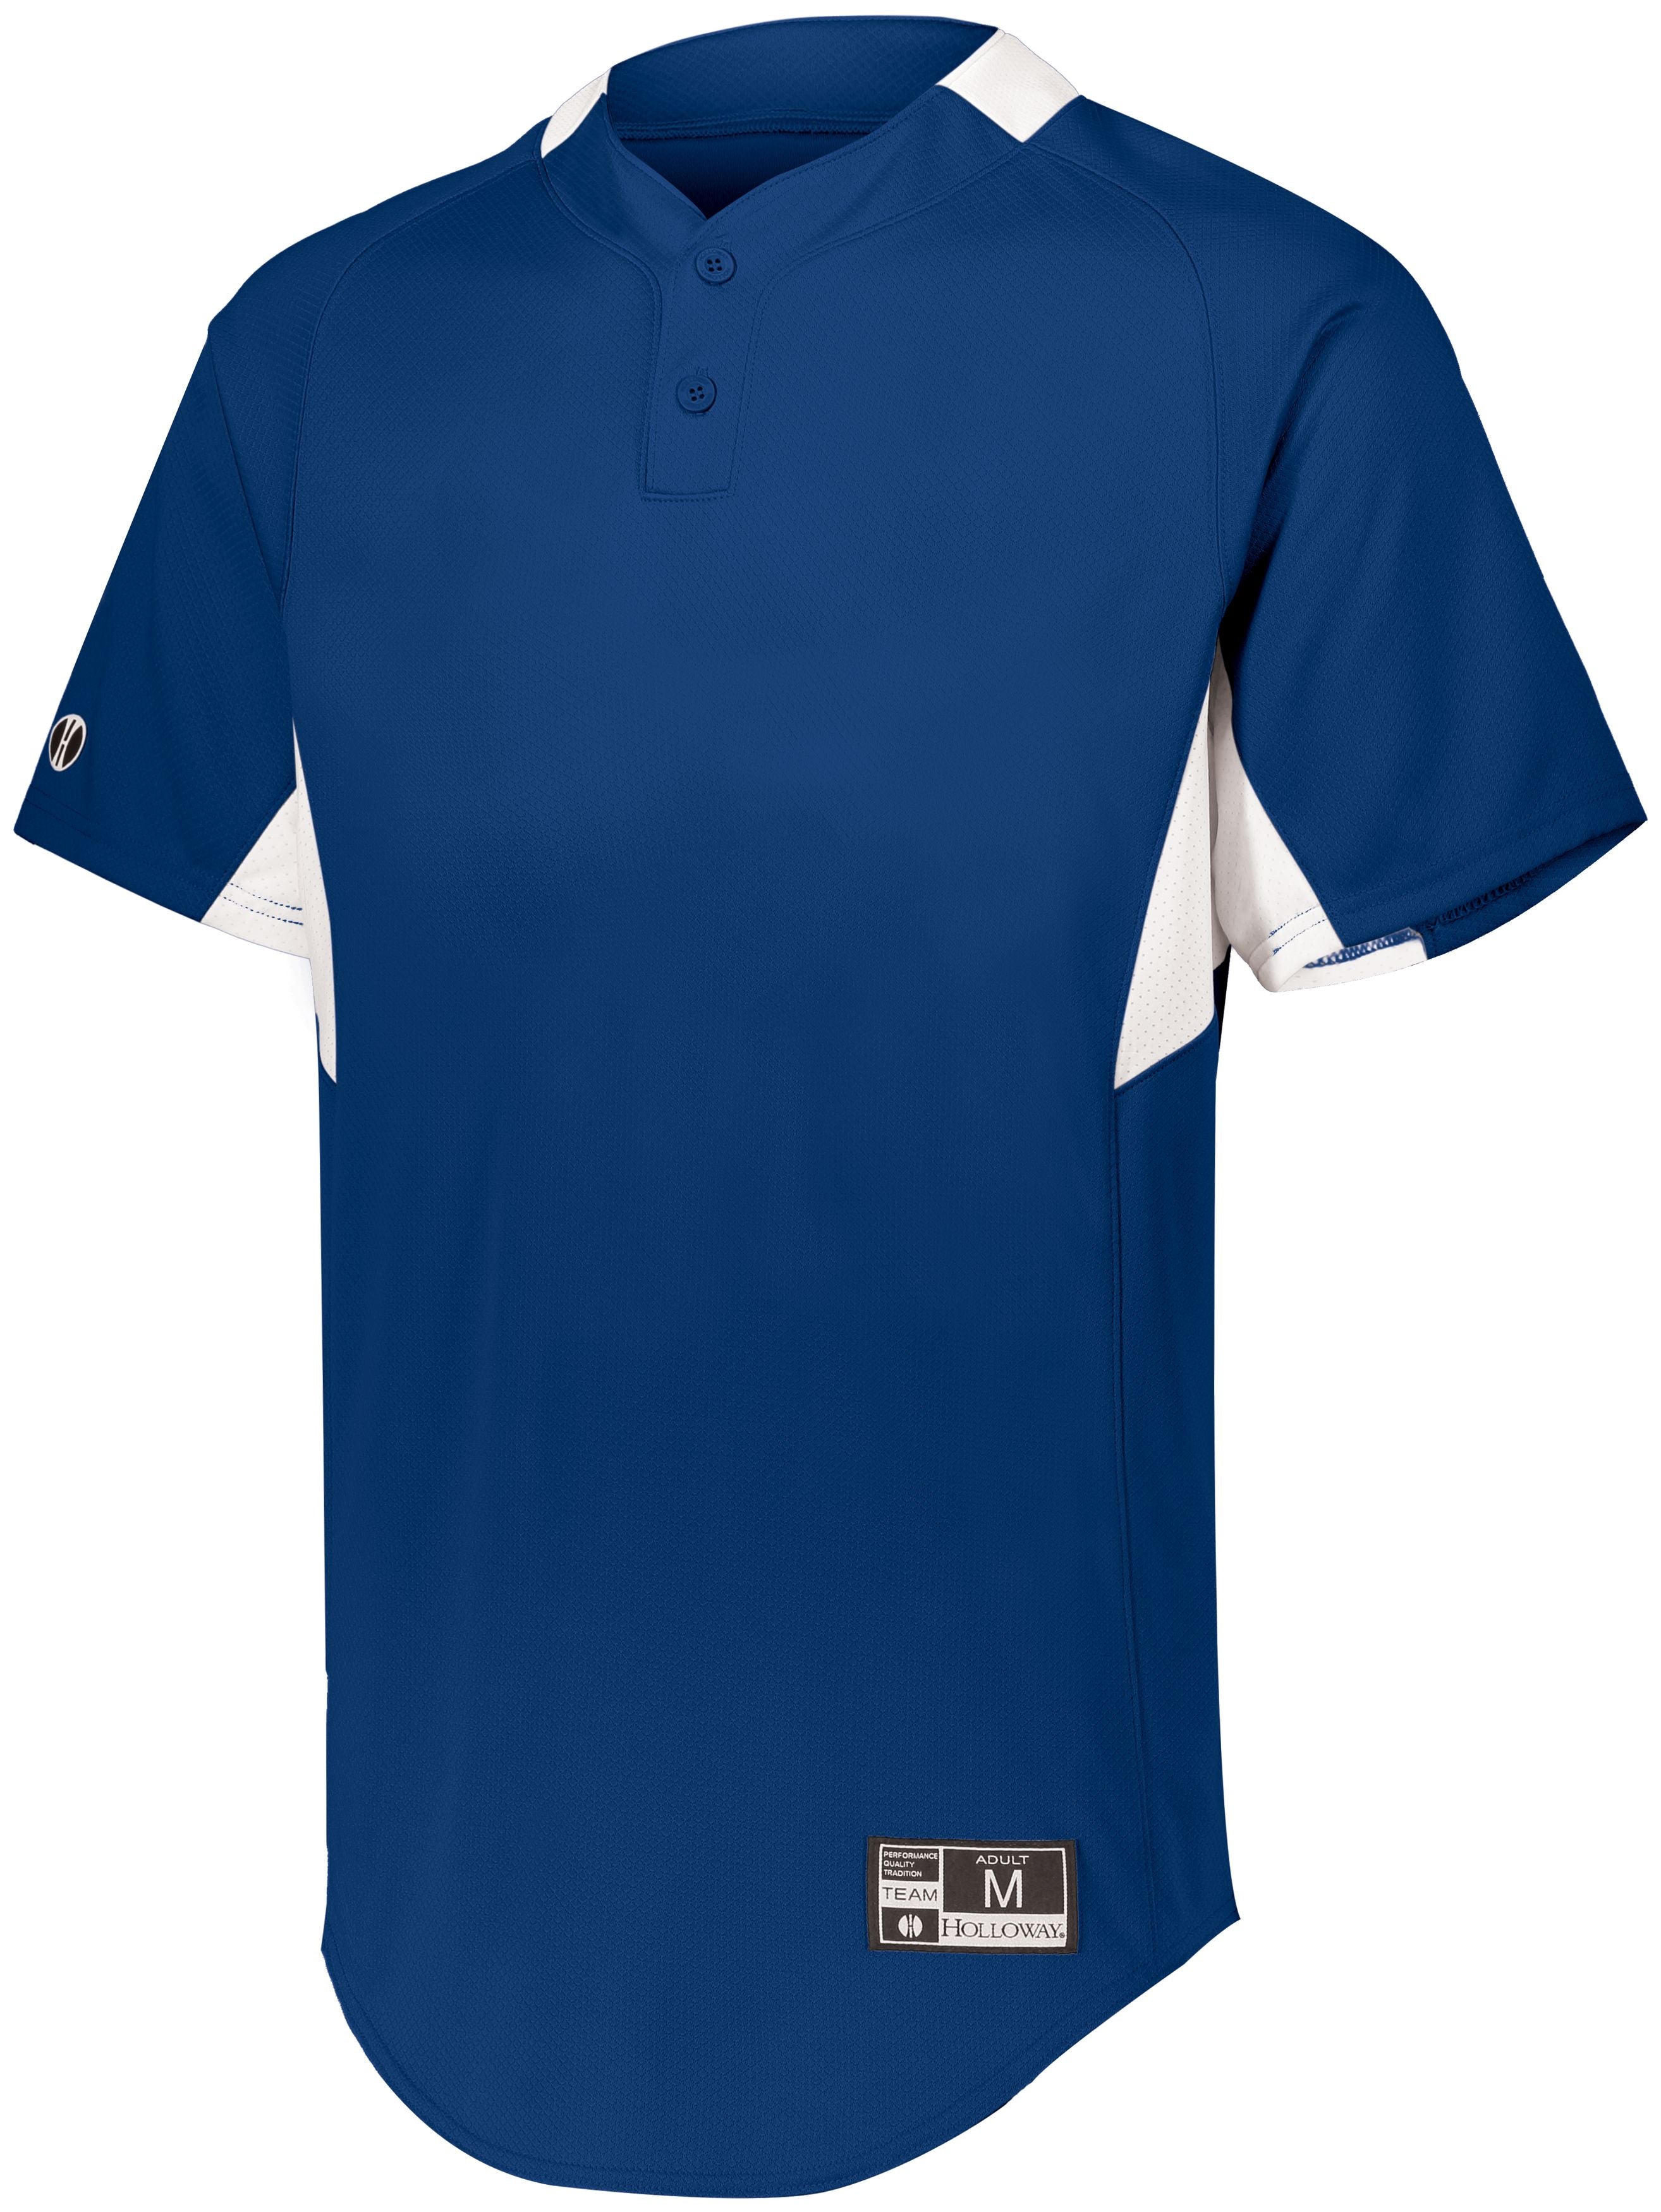 Holloway Youth  Game7 Two-Button Baseball Jersey in Royal/White  -Part of the Youth, Youth-Jersey, Baseball, Holloway, Shirts, All-Sports, All-Sports-1 product lines at KanaleyCreations.com